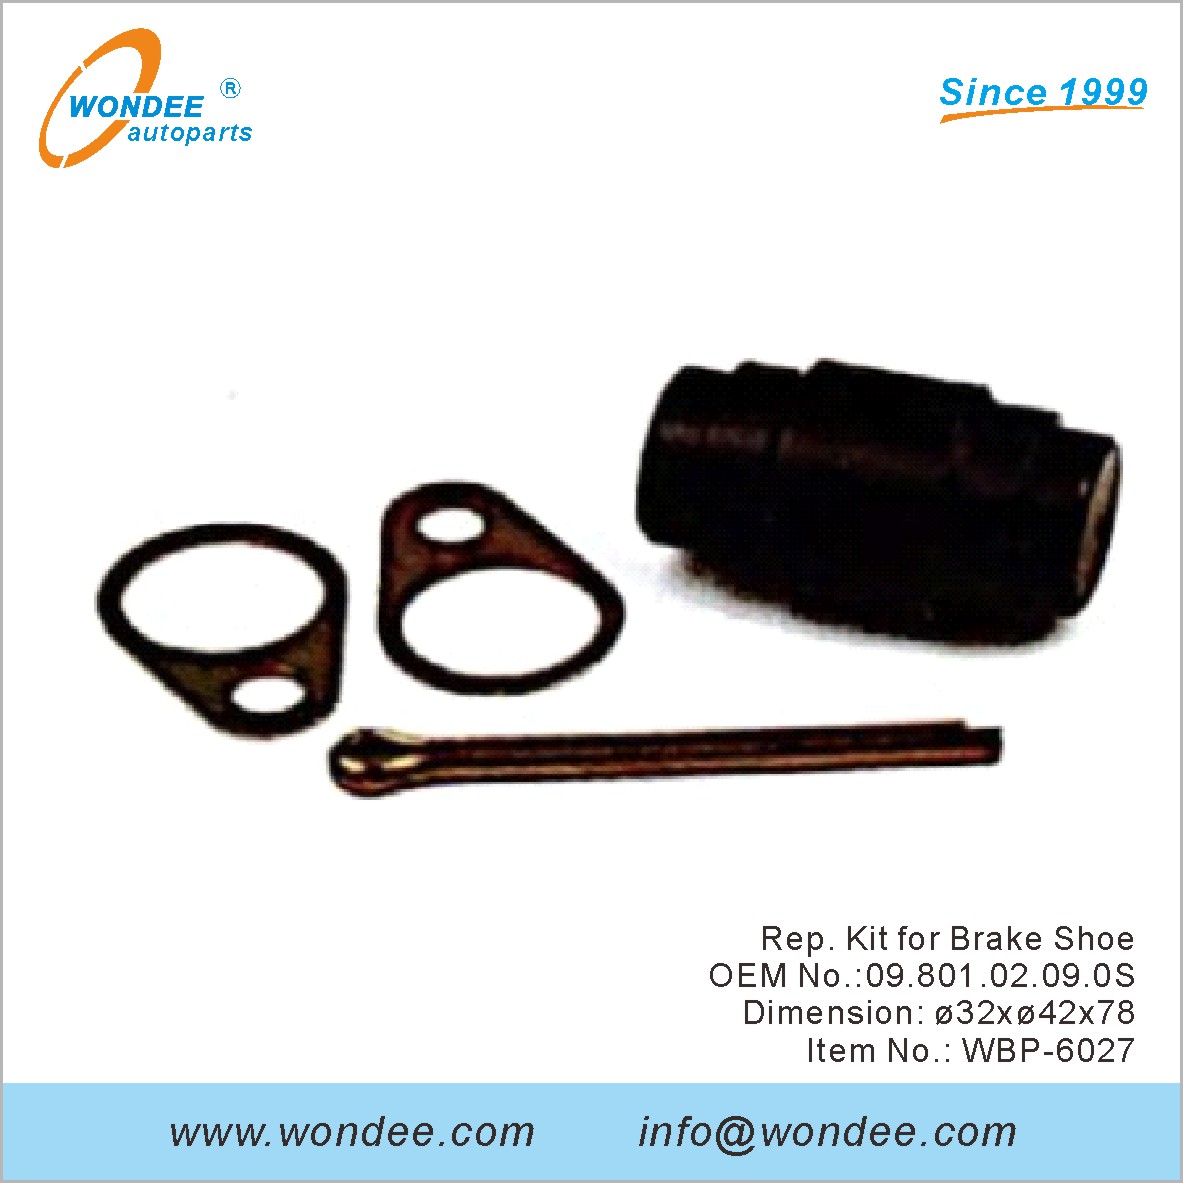 Rep Kit for Brake Shoe OEM 0980102090S for BPW from WONDEE